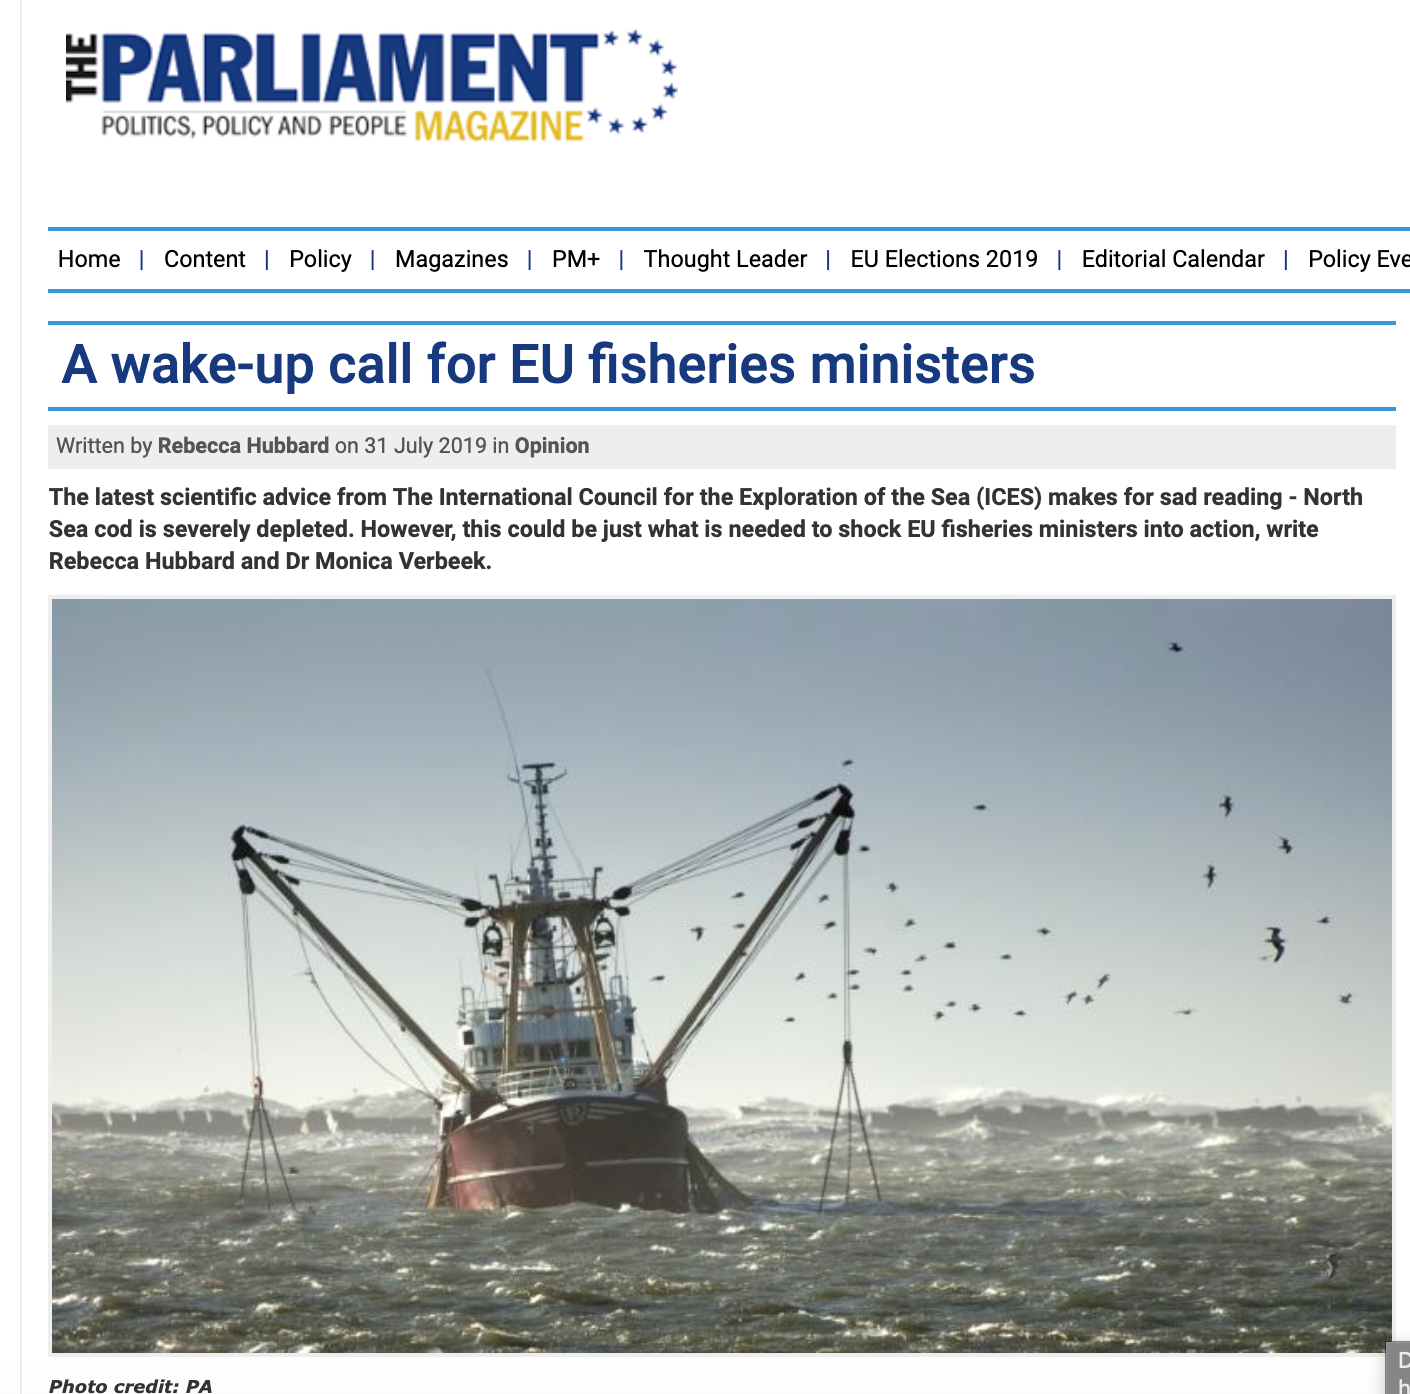 A wake-up call for EU fisheries ministers